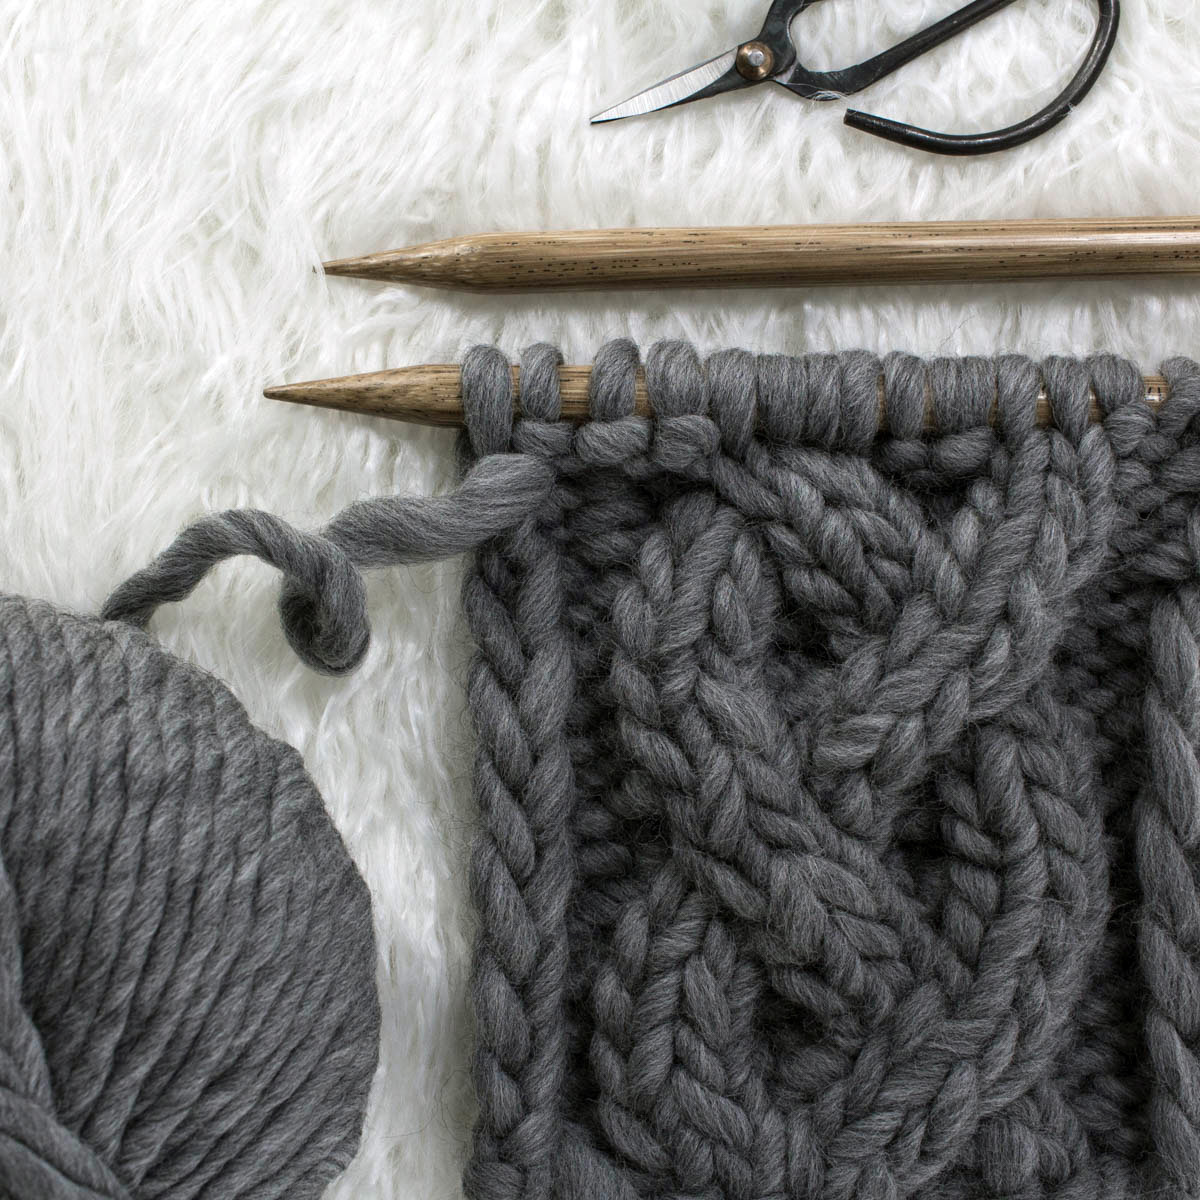 30+ Cable Knit Stitch + Video Tutorials : Brome Fields